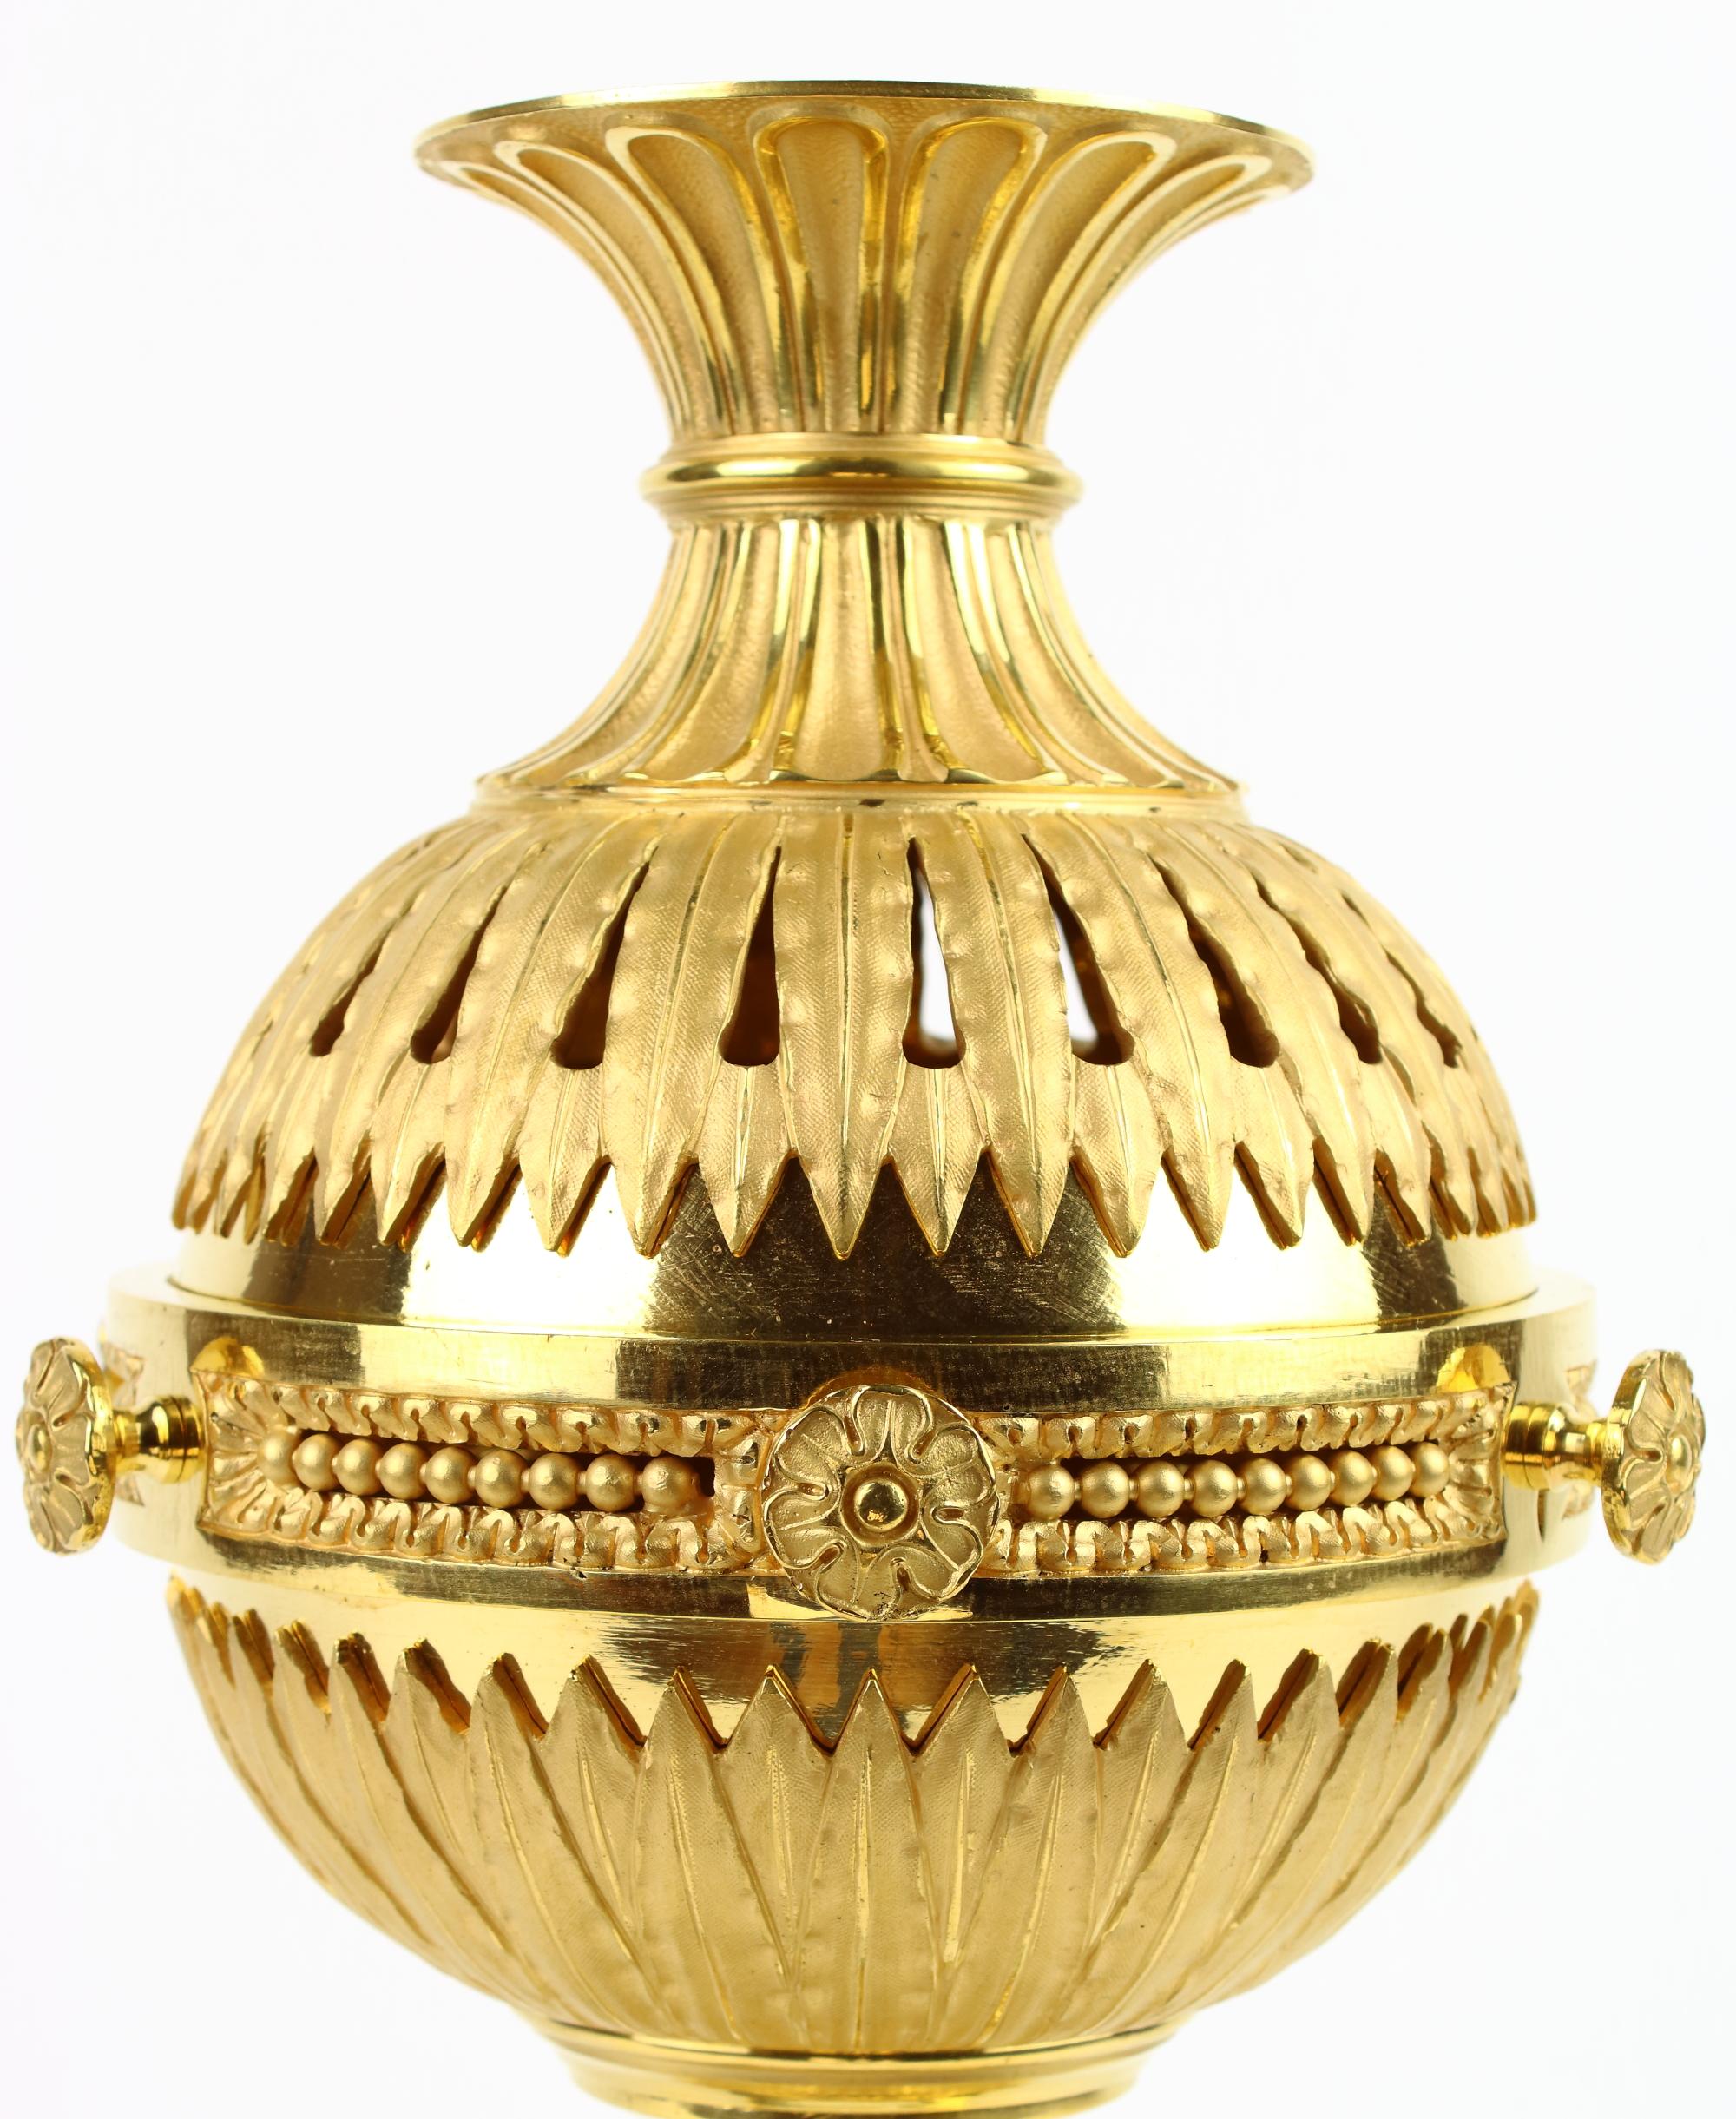 French Late 18thh Century Louis XVI Gilt Bronze Incense Burner or Brule Parfum For Sale 4